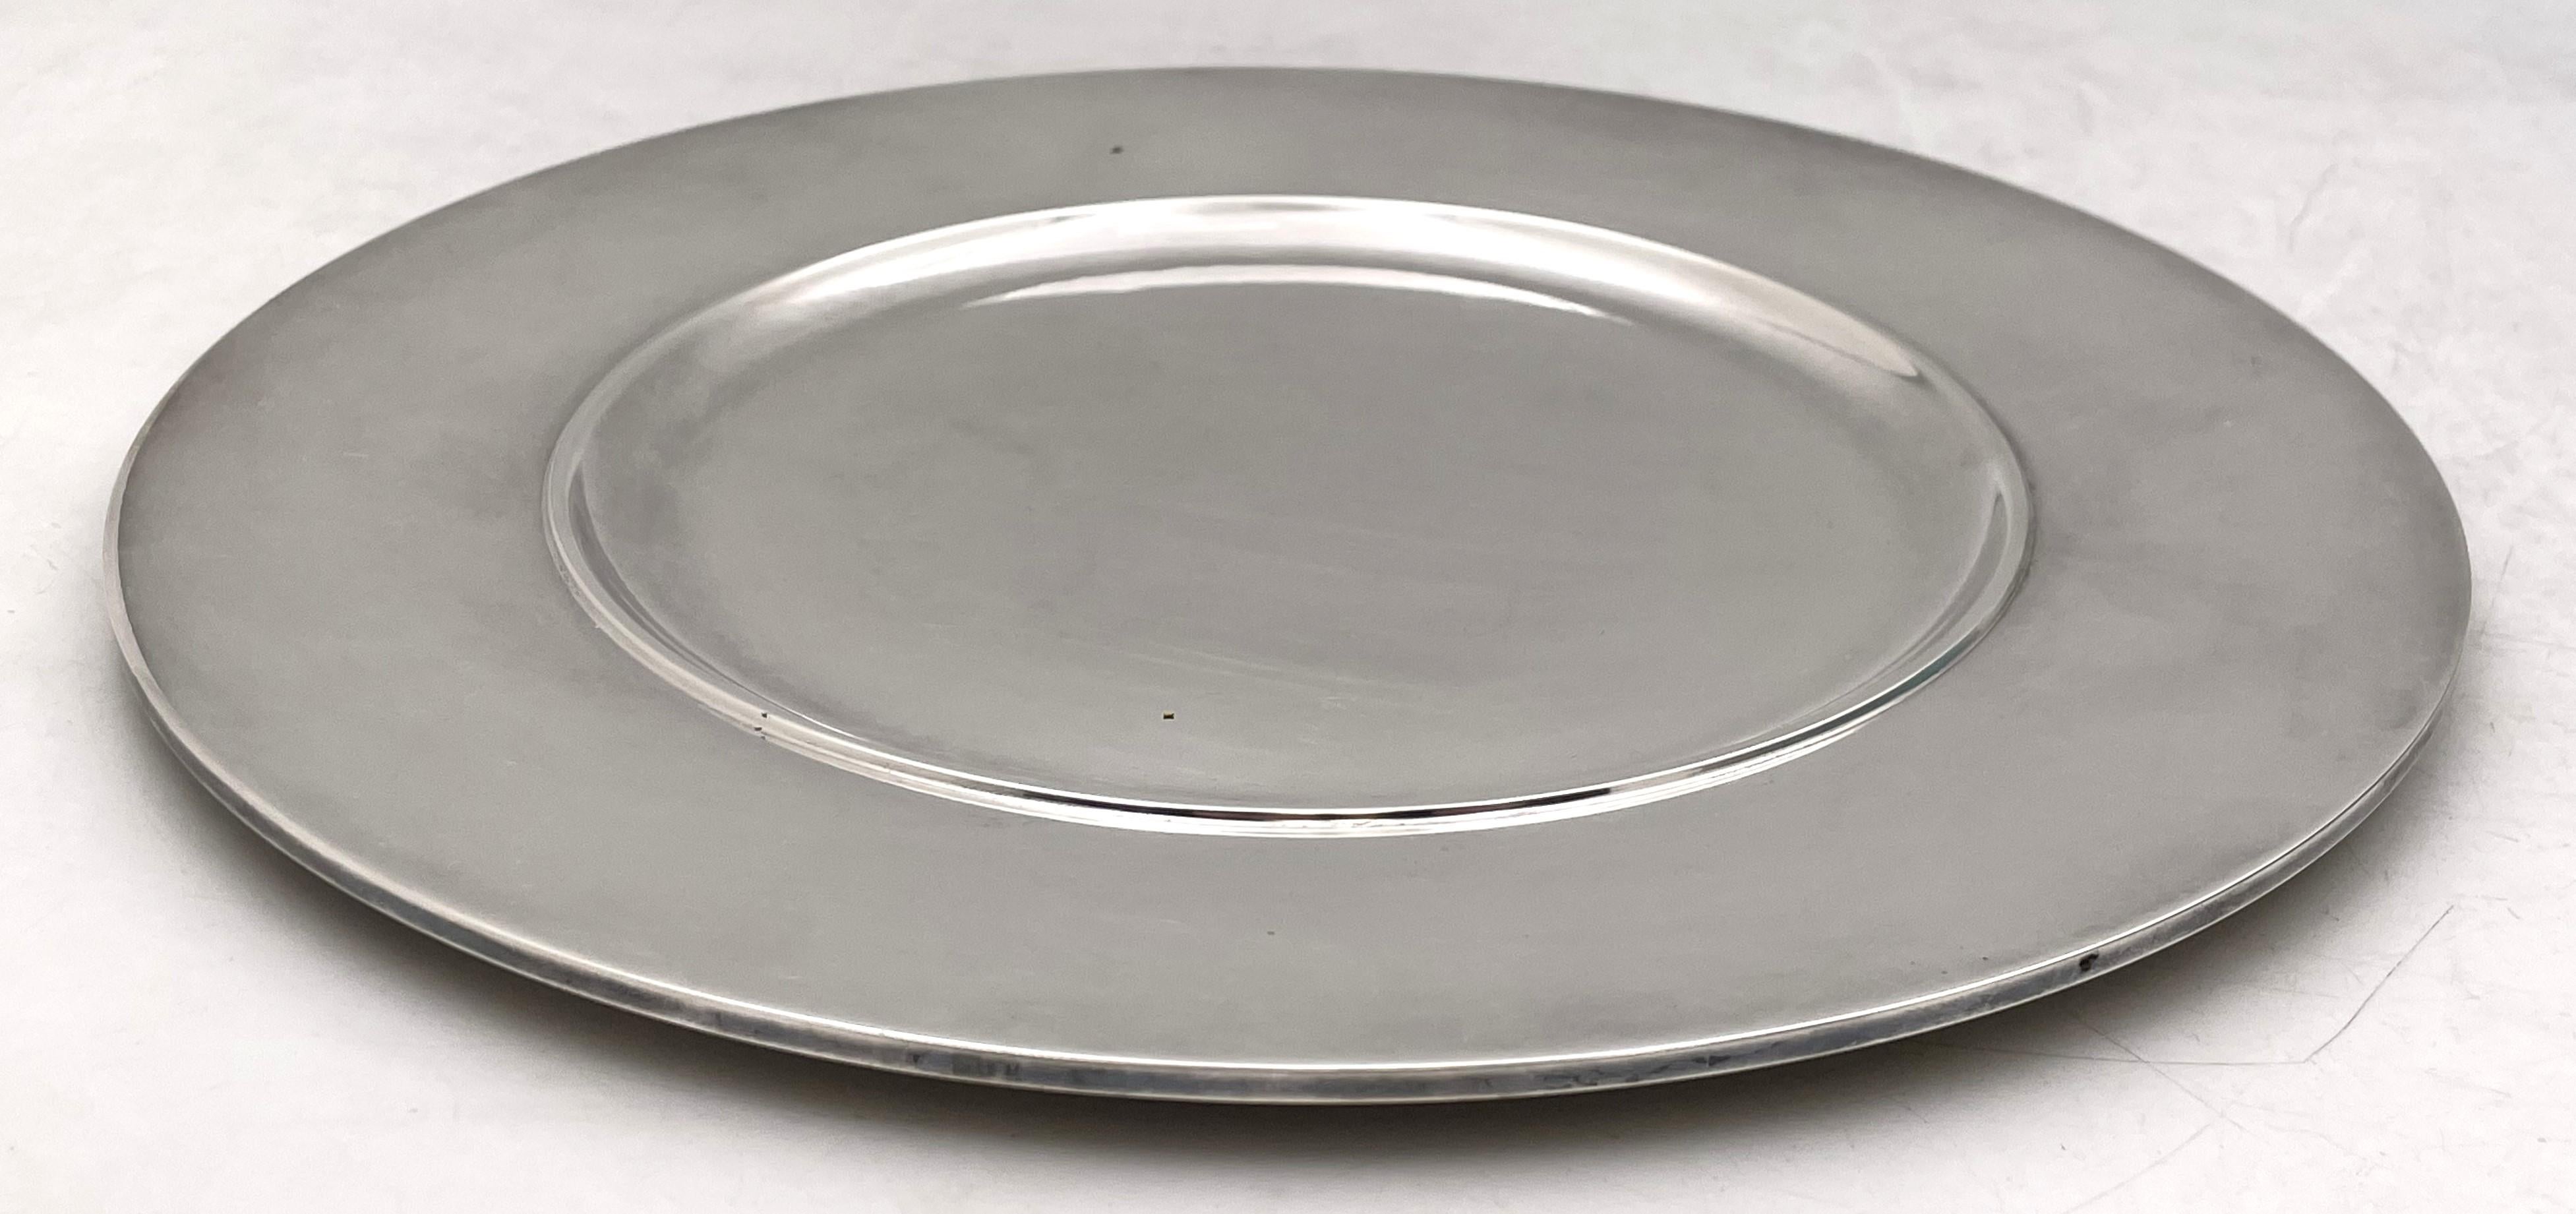 Danish Georg Jensen by J. Rohde Sterling Silver Plate/ Charger #587C Art Deco 1930s For Sale